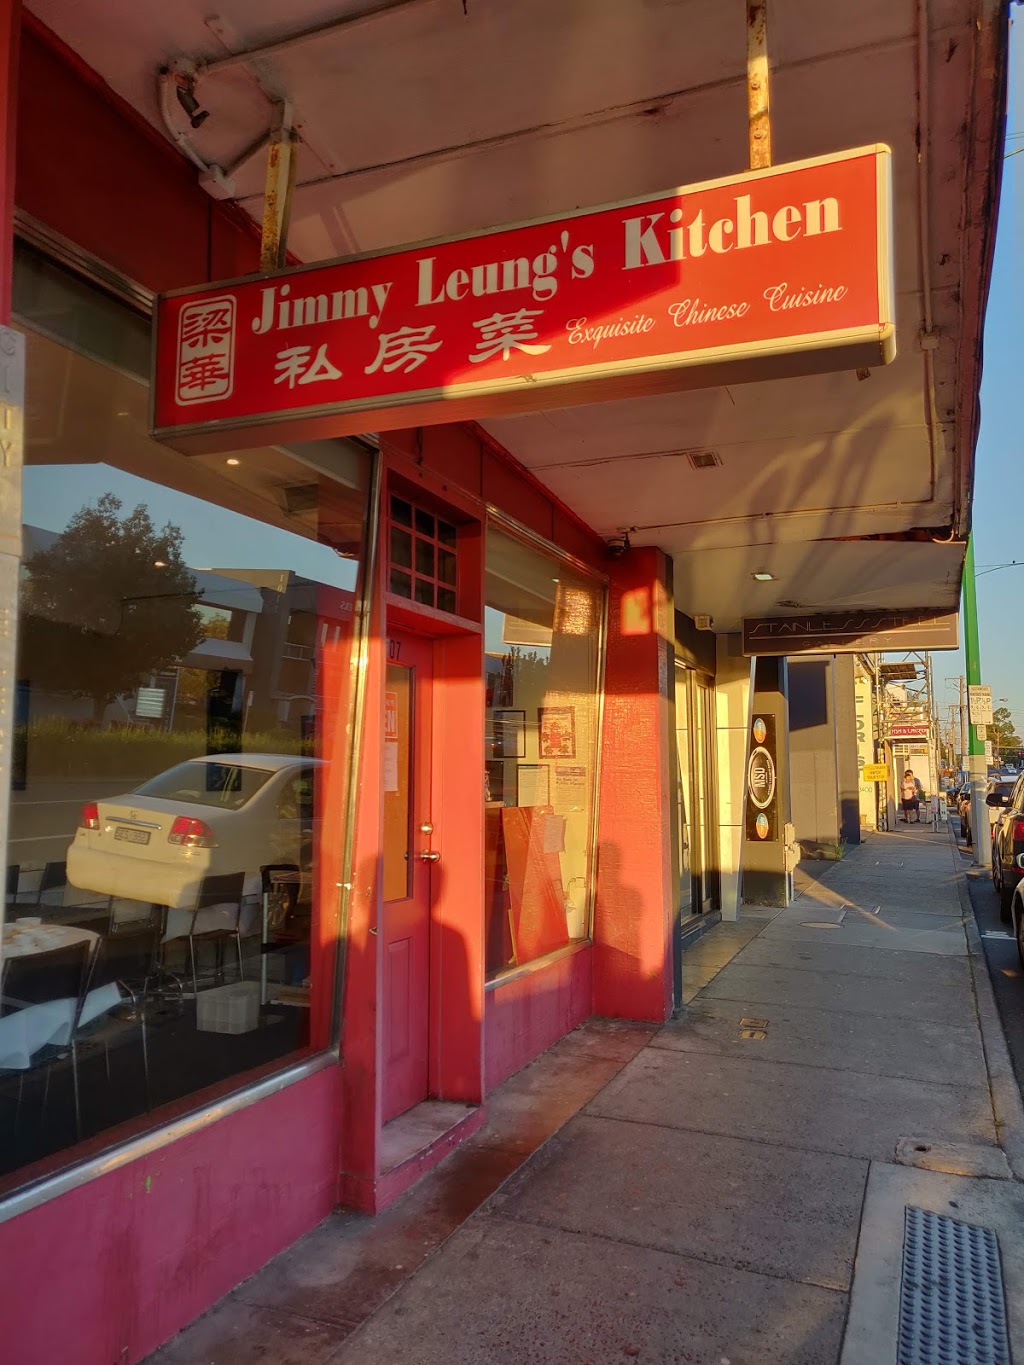 Jimmy Leungs Kitchen | restaurant | 1007 Doncaster Rd, Doncaster East VIC 3109, Australia | 0398945432 OR +61 3 9894 5432